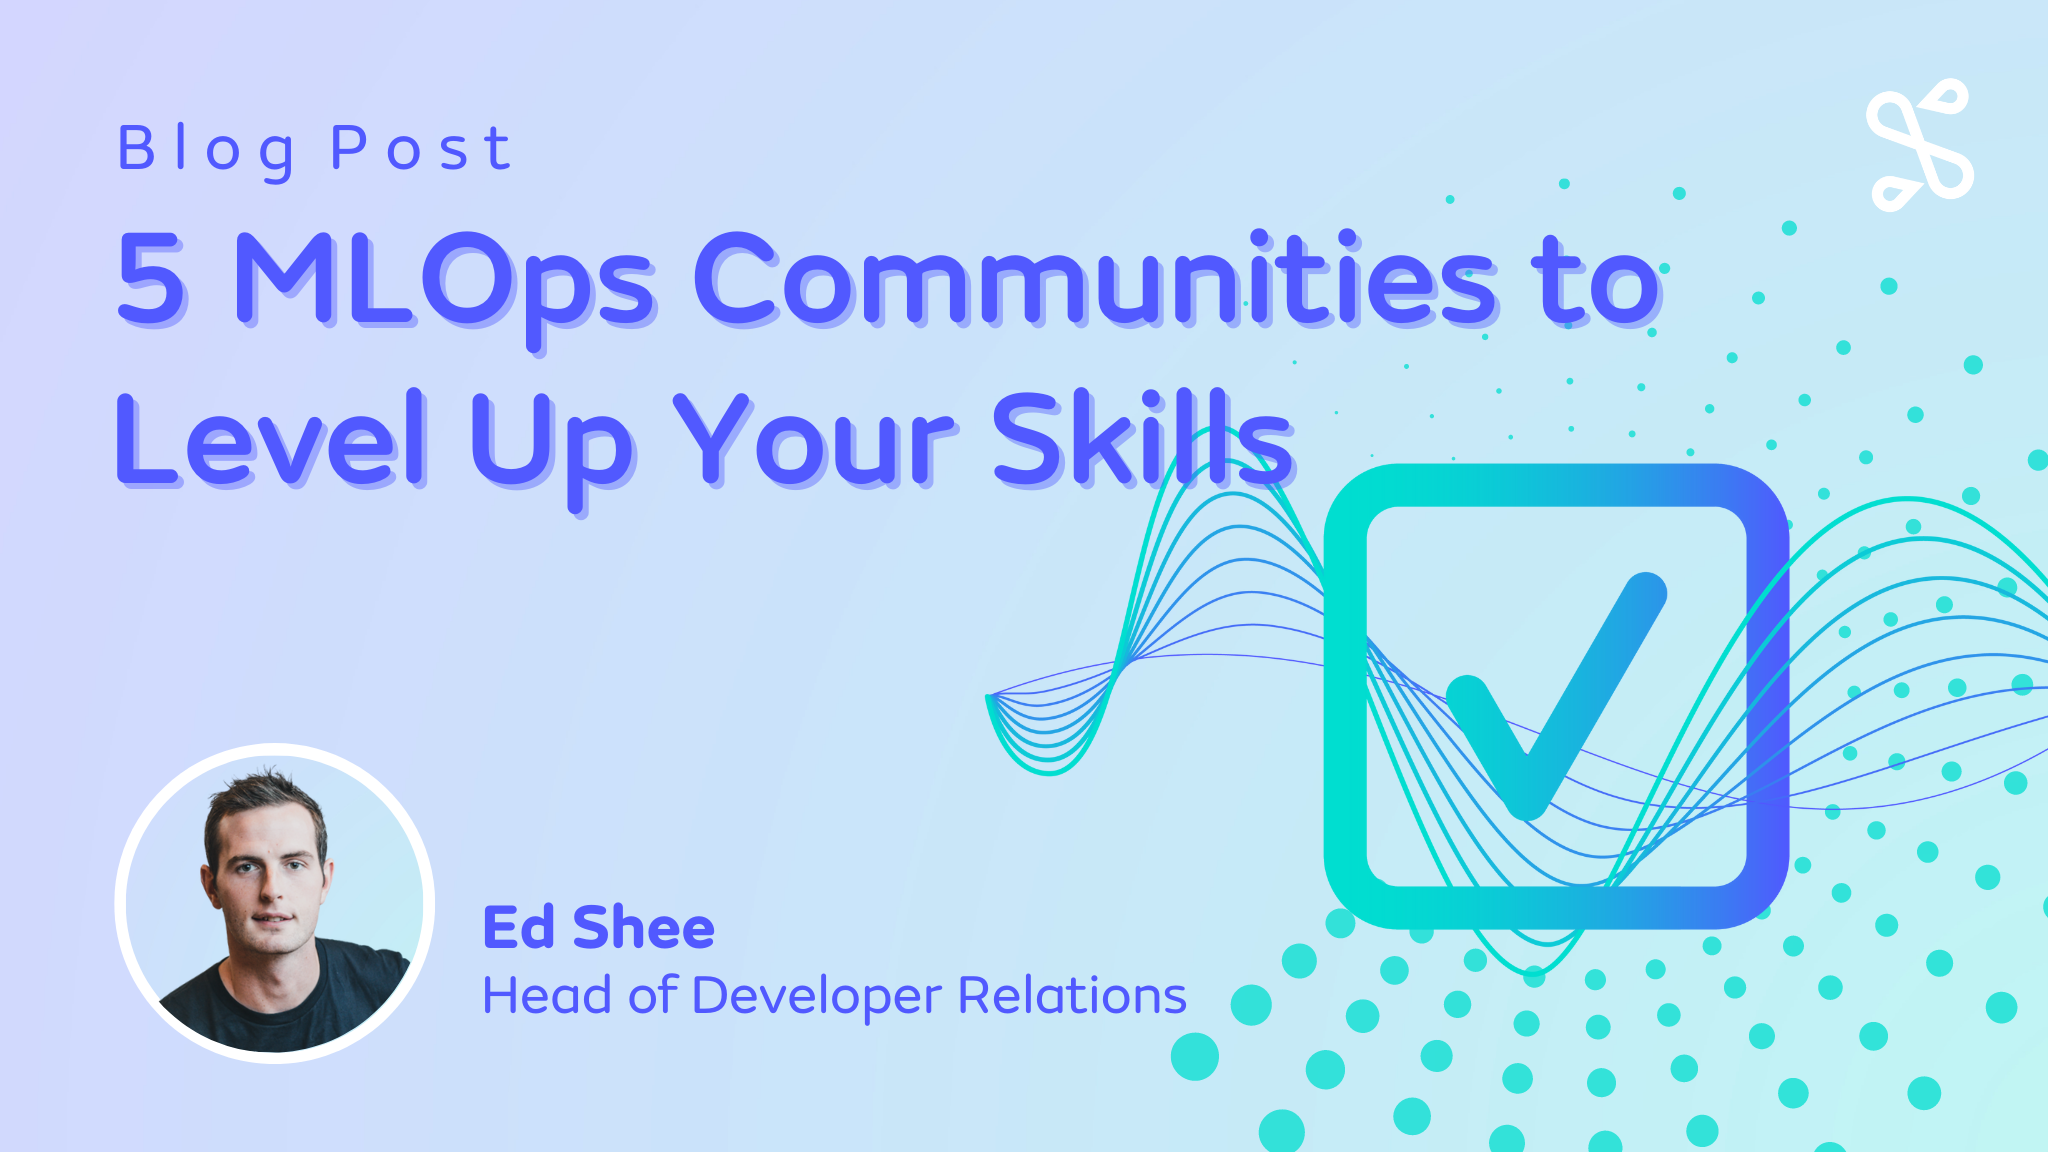 5 MLOps Communities to Level Up Your Skills